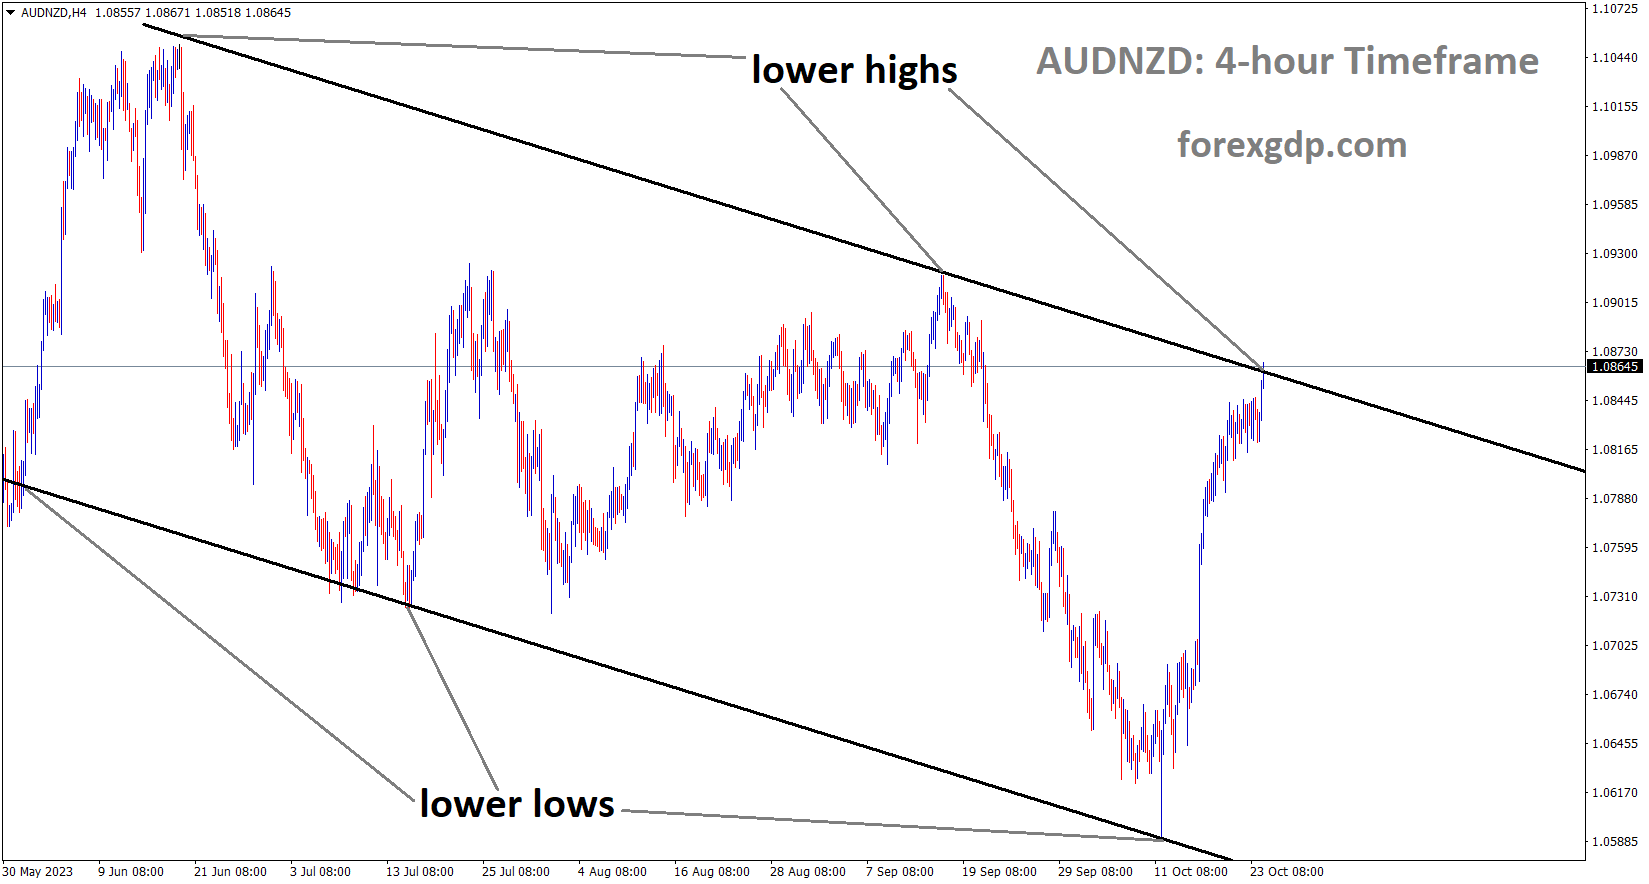 AUDNZD is moving in the Descending channel and the market has reached the lower high area of the channel